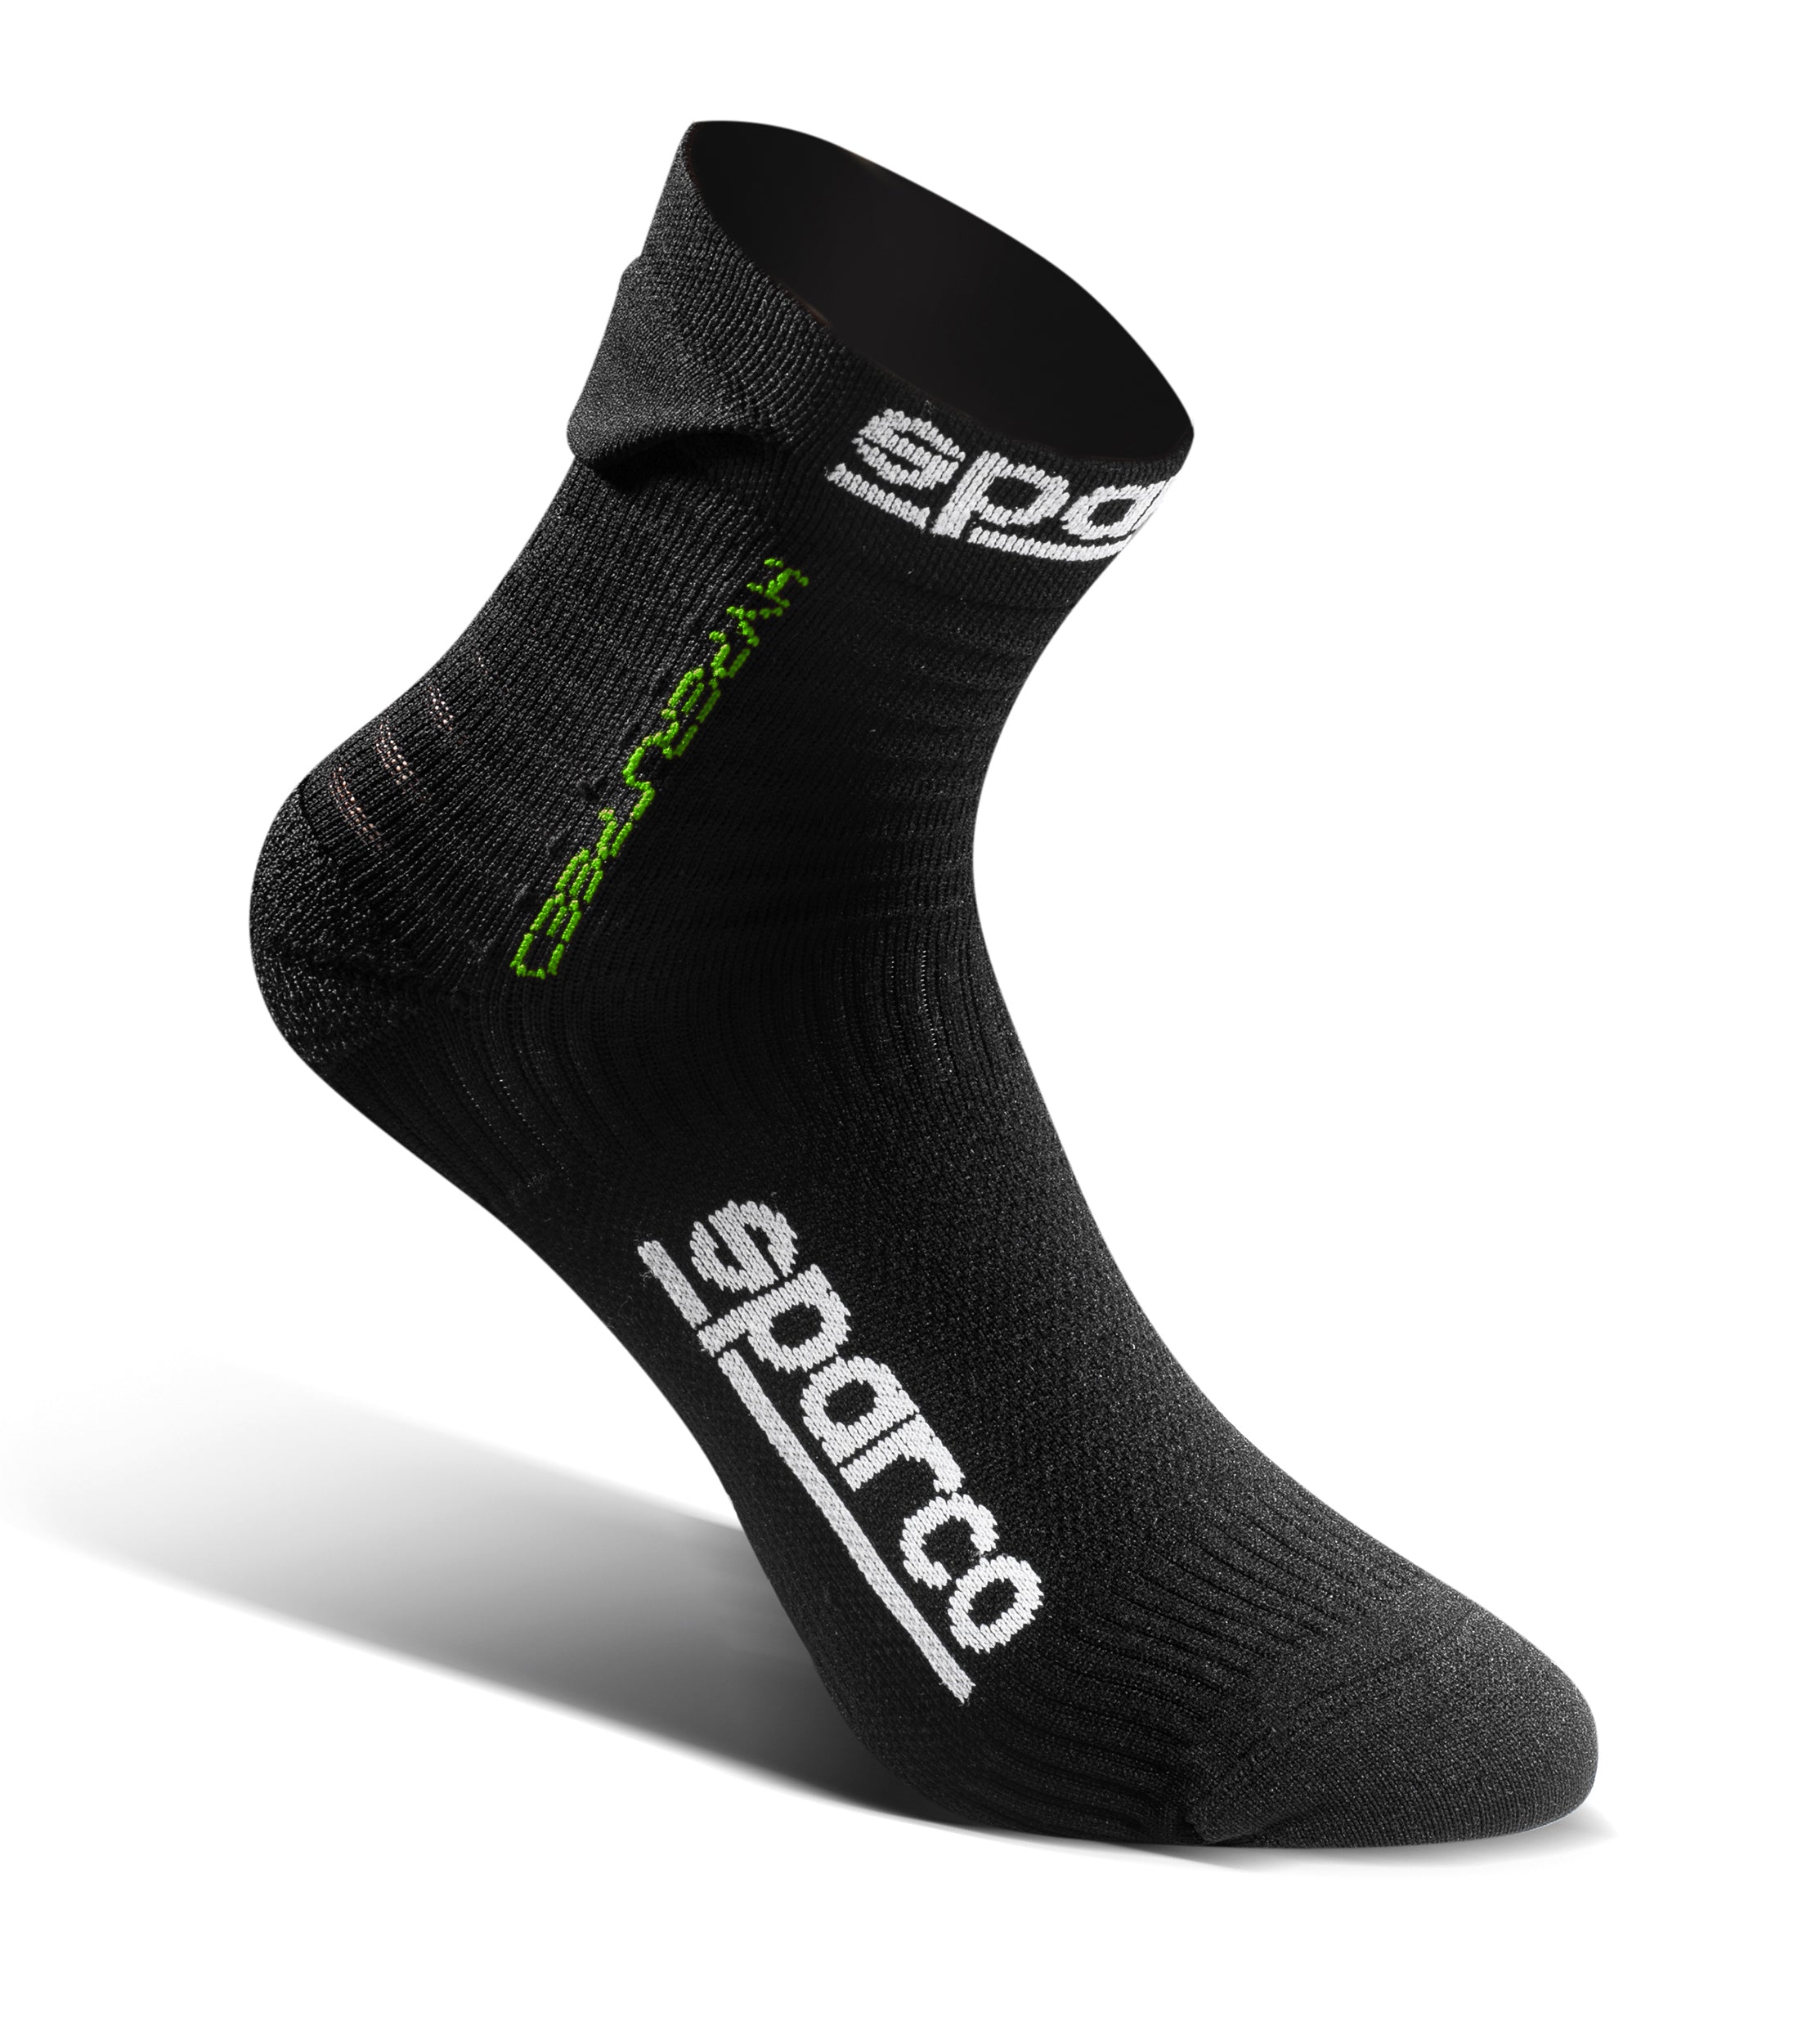 SPARCO 01290NRVF4041 Driving socks HYPERSPEED, black/green, size 40/41 Photo-0 